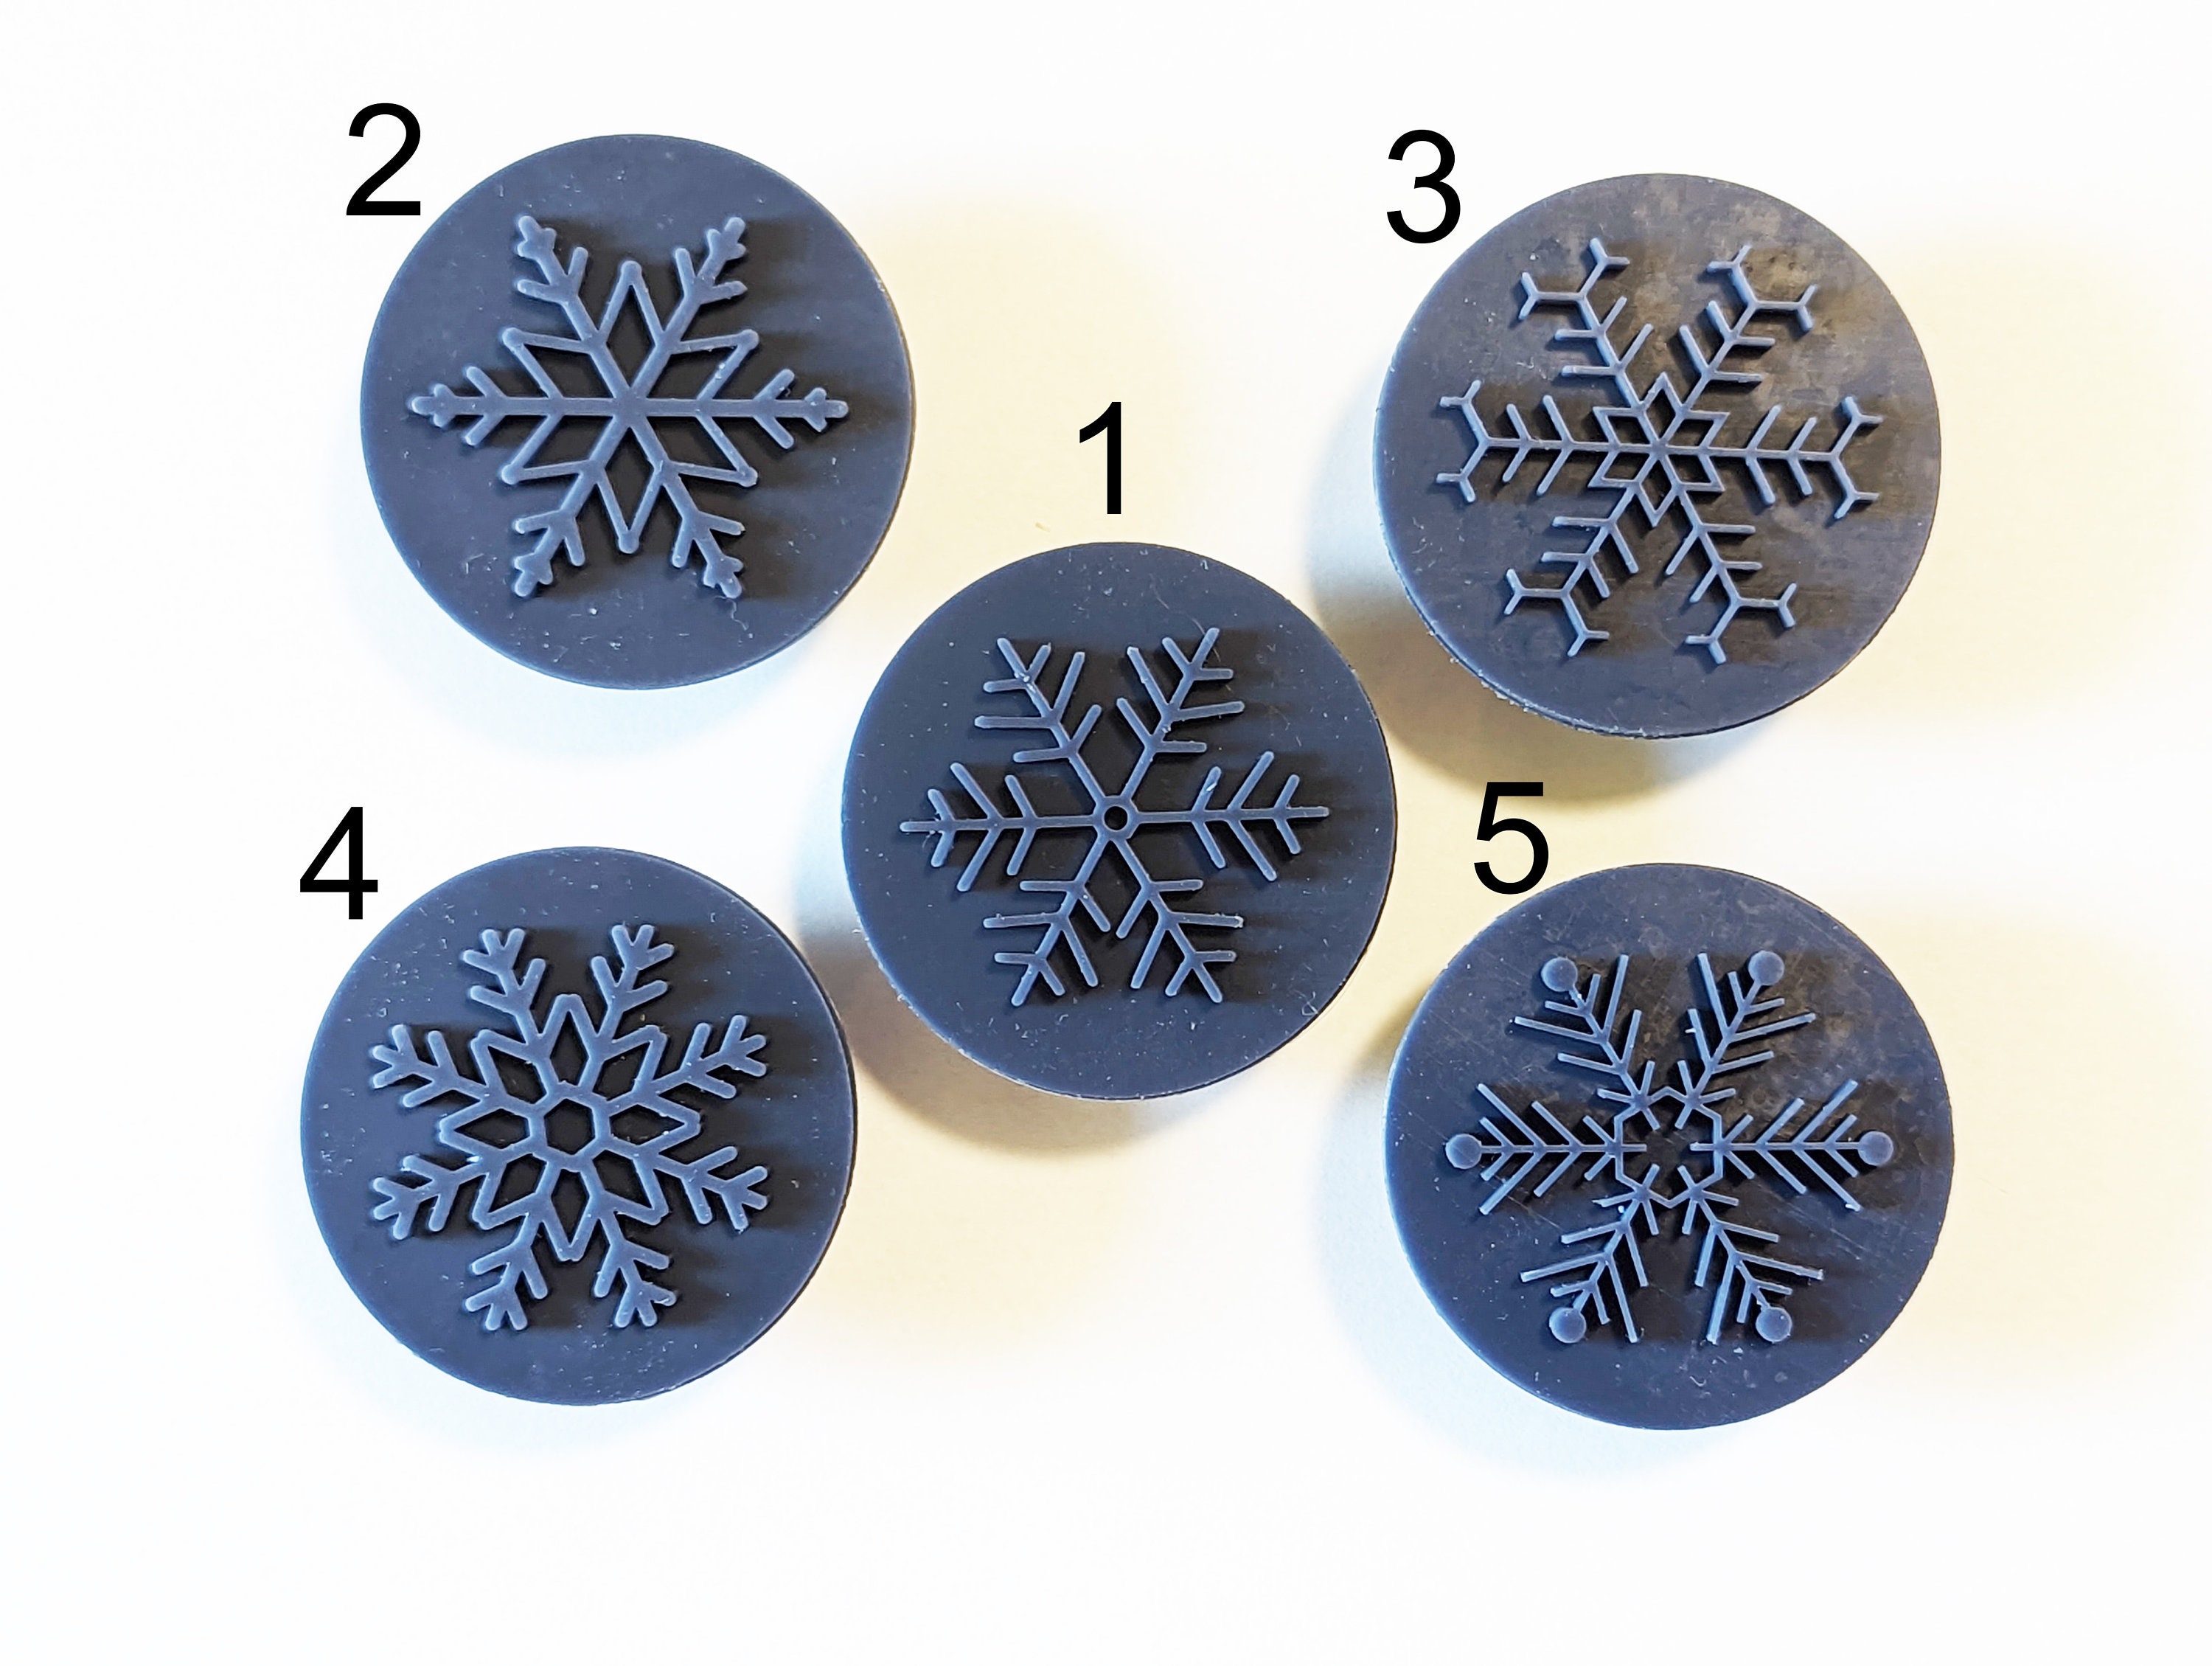  CRASPIRE Acrylic Soap Stamp Snowflake Handmade Soap Stamp with  Handle 1.57 Soap Embossing Stamp for Cookie Clay Pottery Stamp Biscuits  Gummier DIY Arts Crafts Making Projects